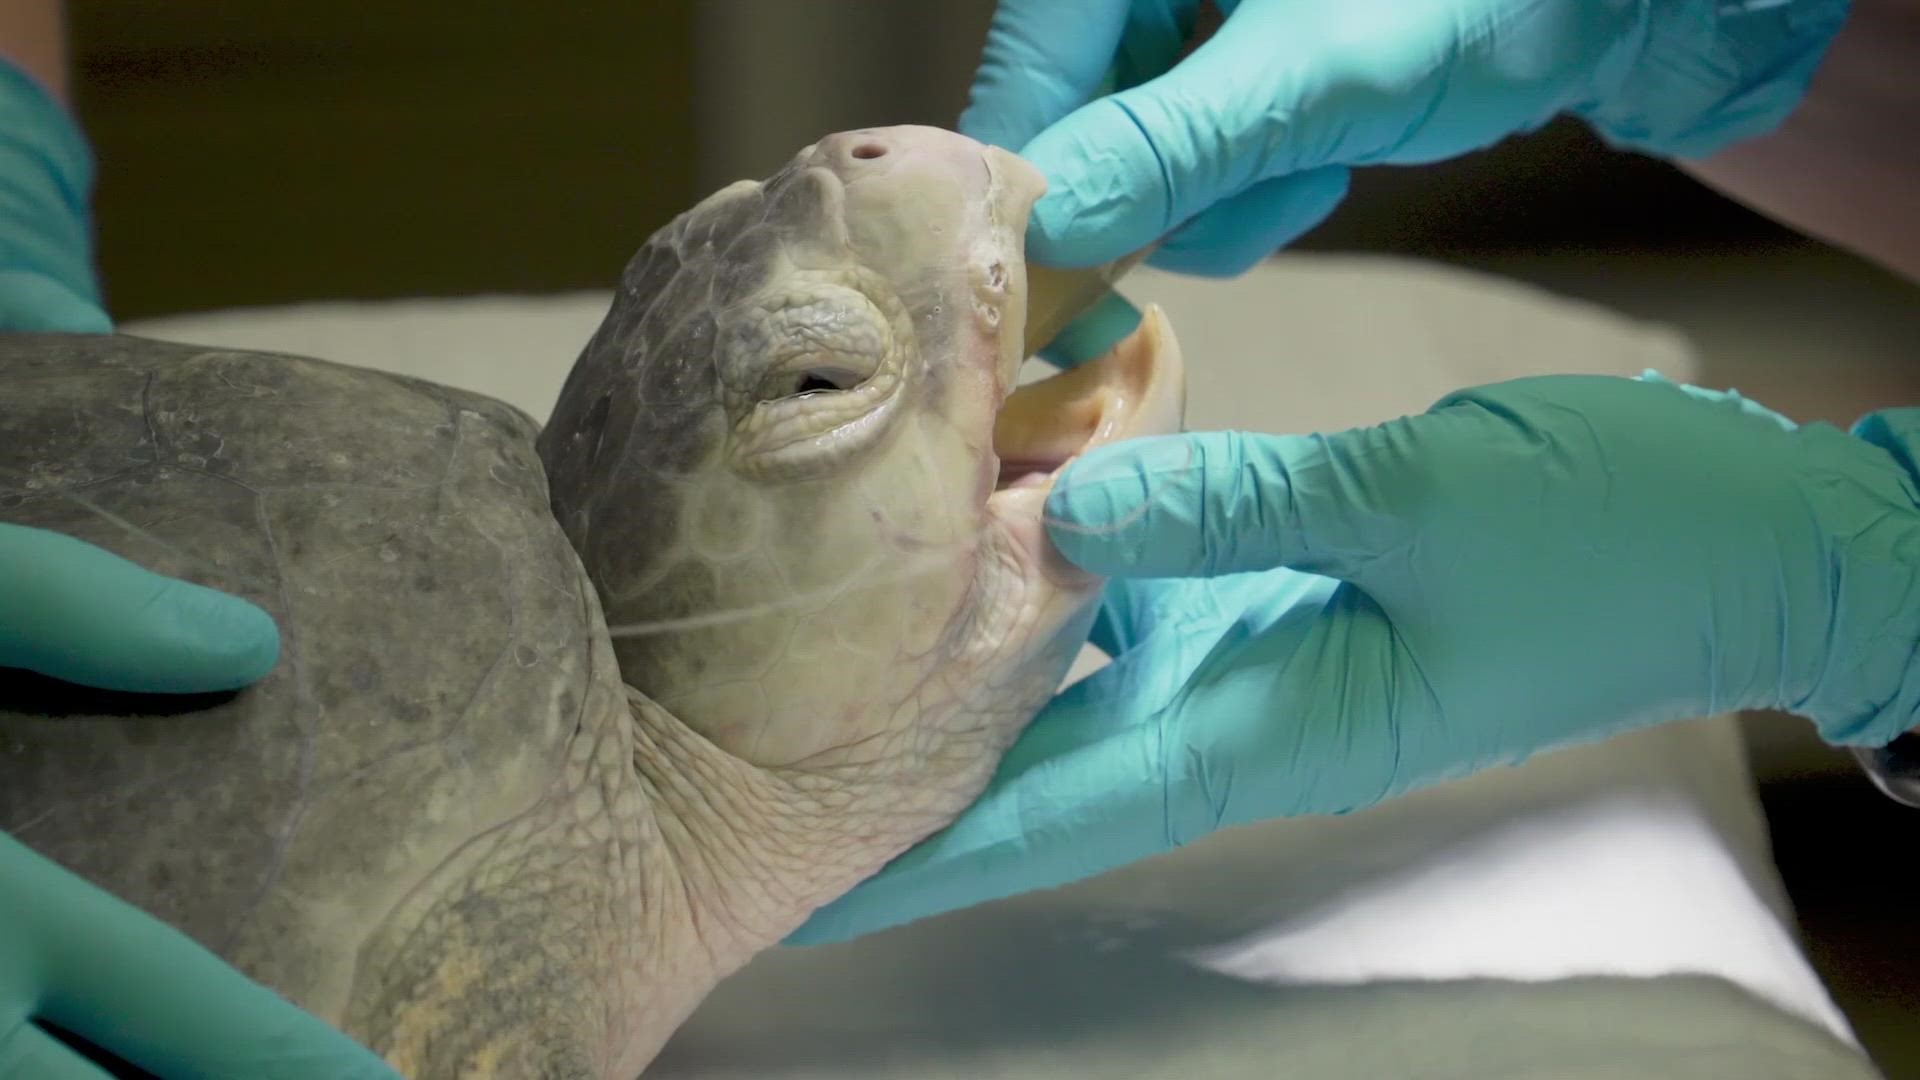 After receiving treatment for infections, red tide exposure and surgery, the four turtles were cleared for release.